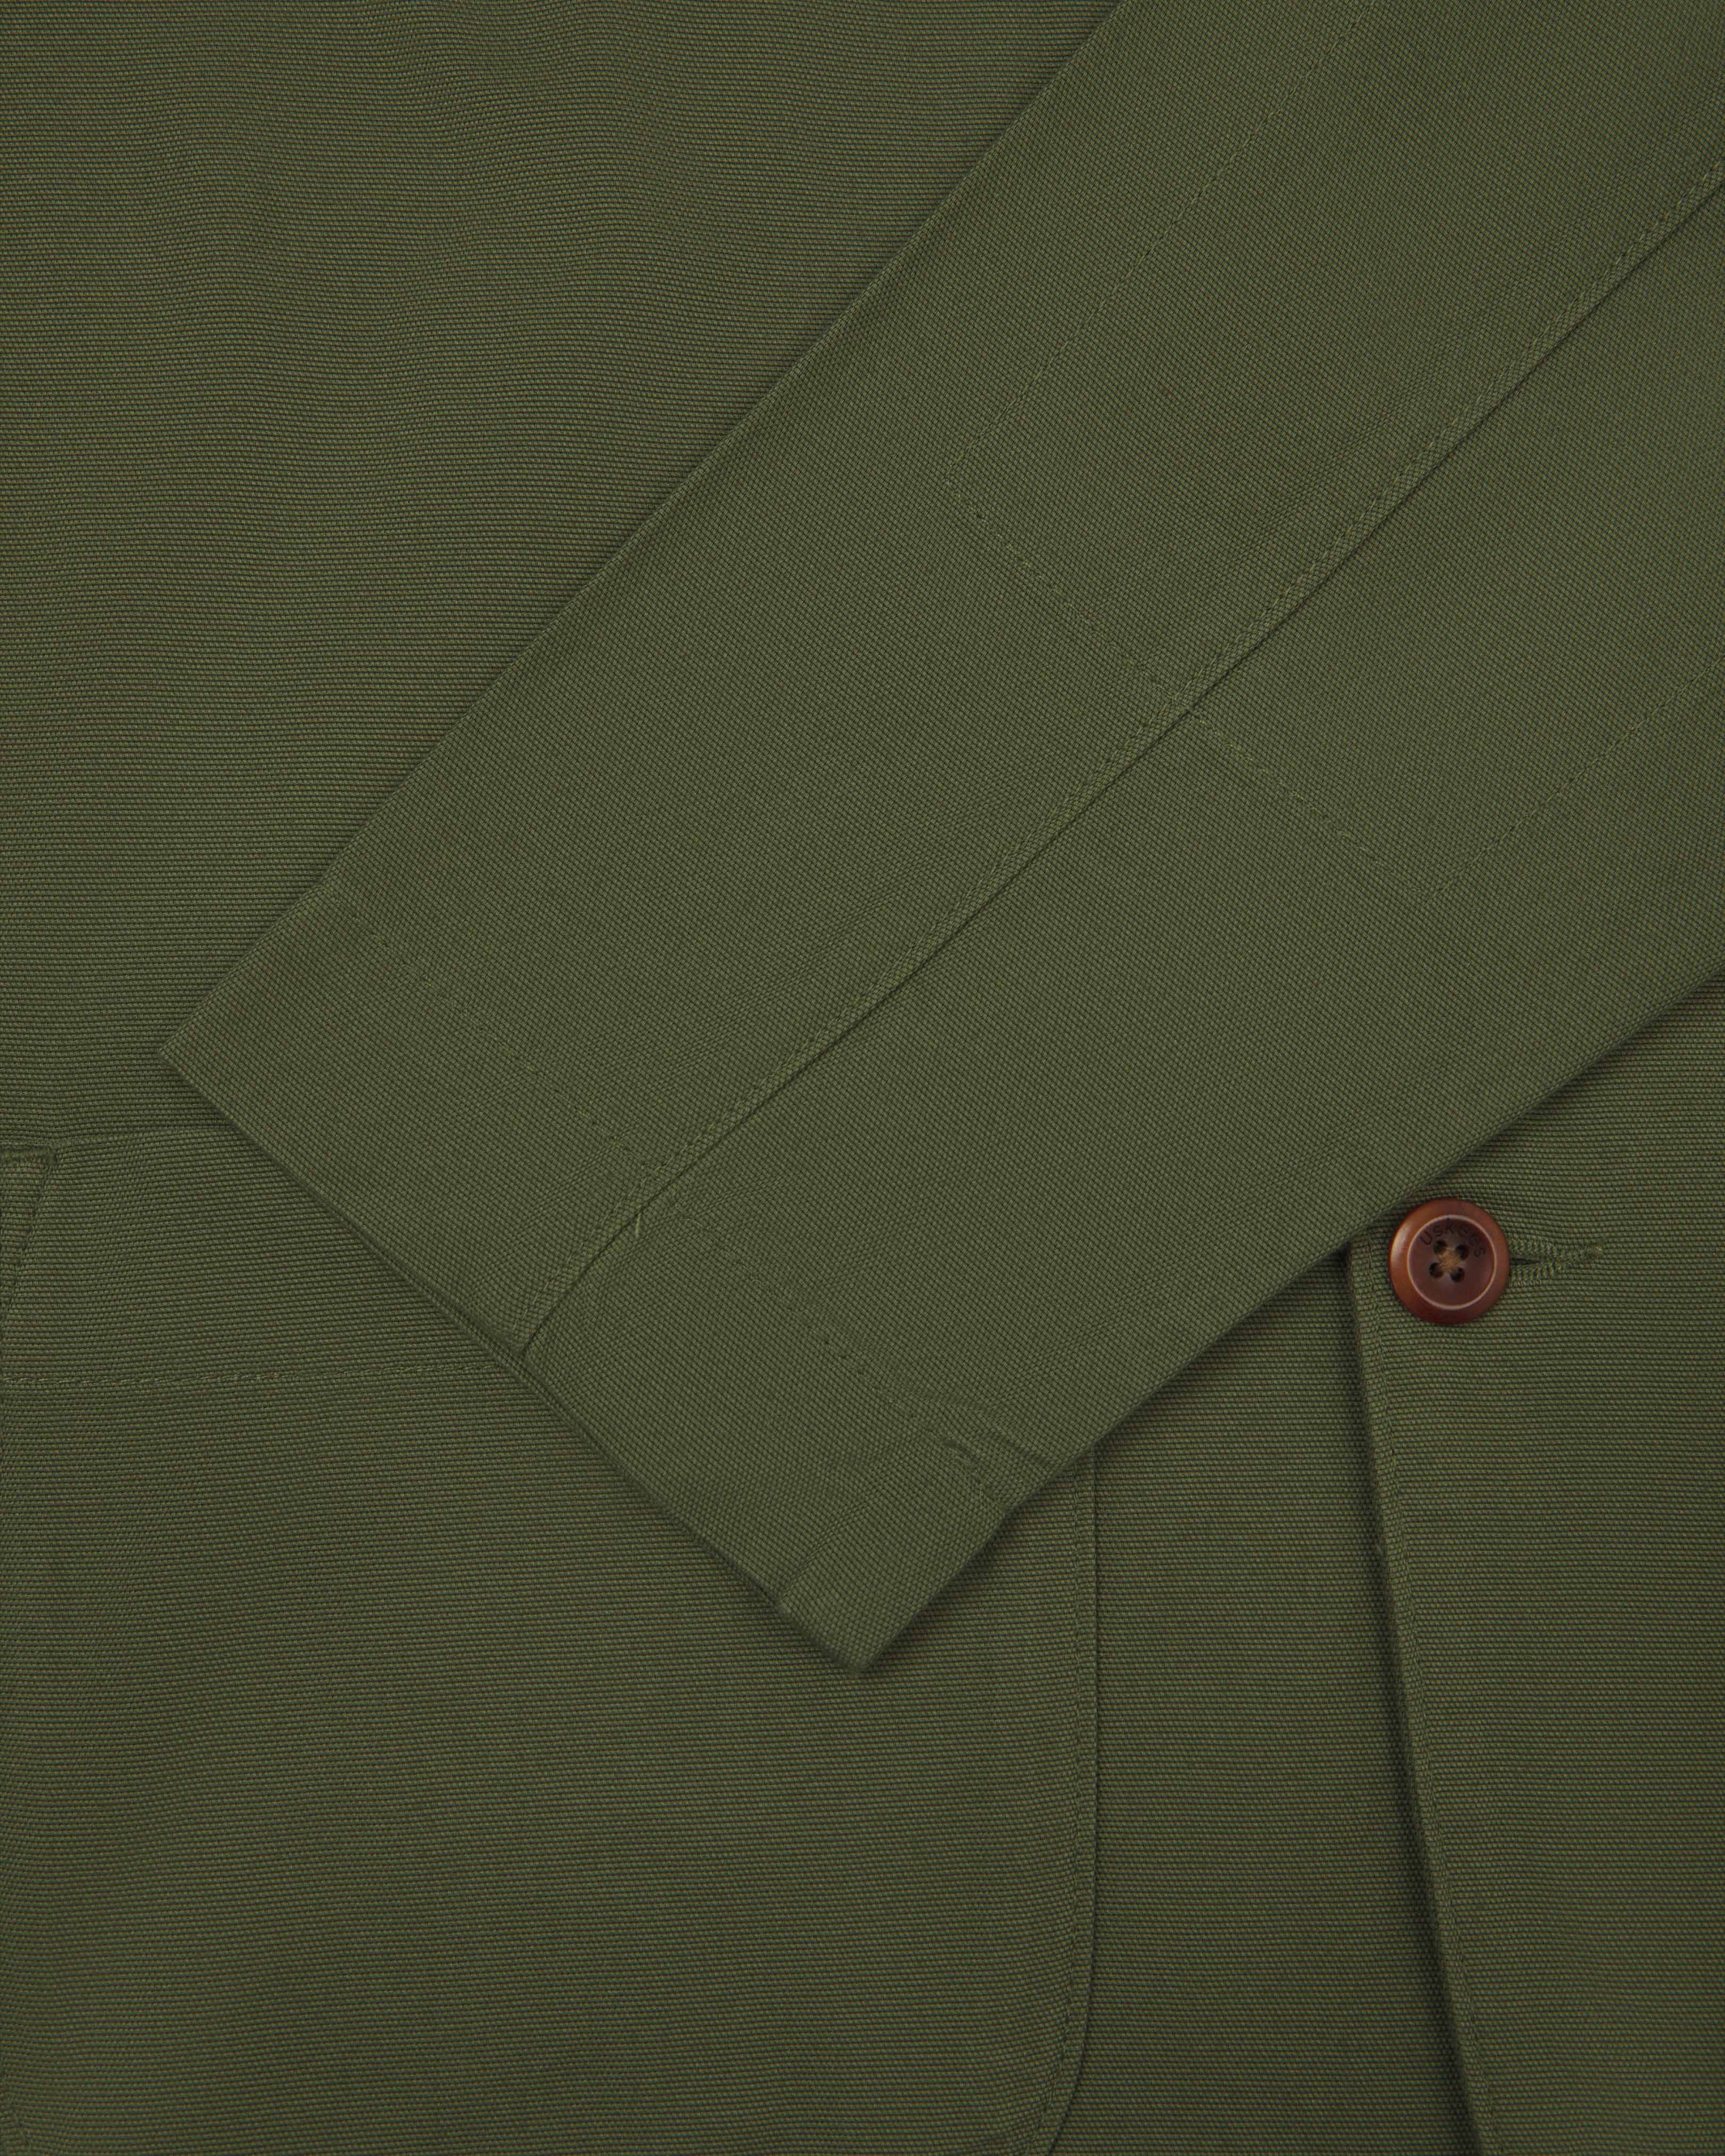 Close-up front view of coriander-green men's organic cotton blazer from Uskees showing sleeve, cuff and corozo button